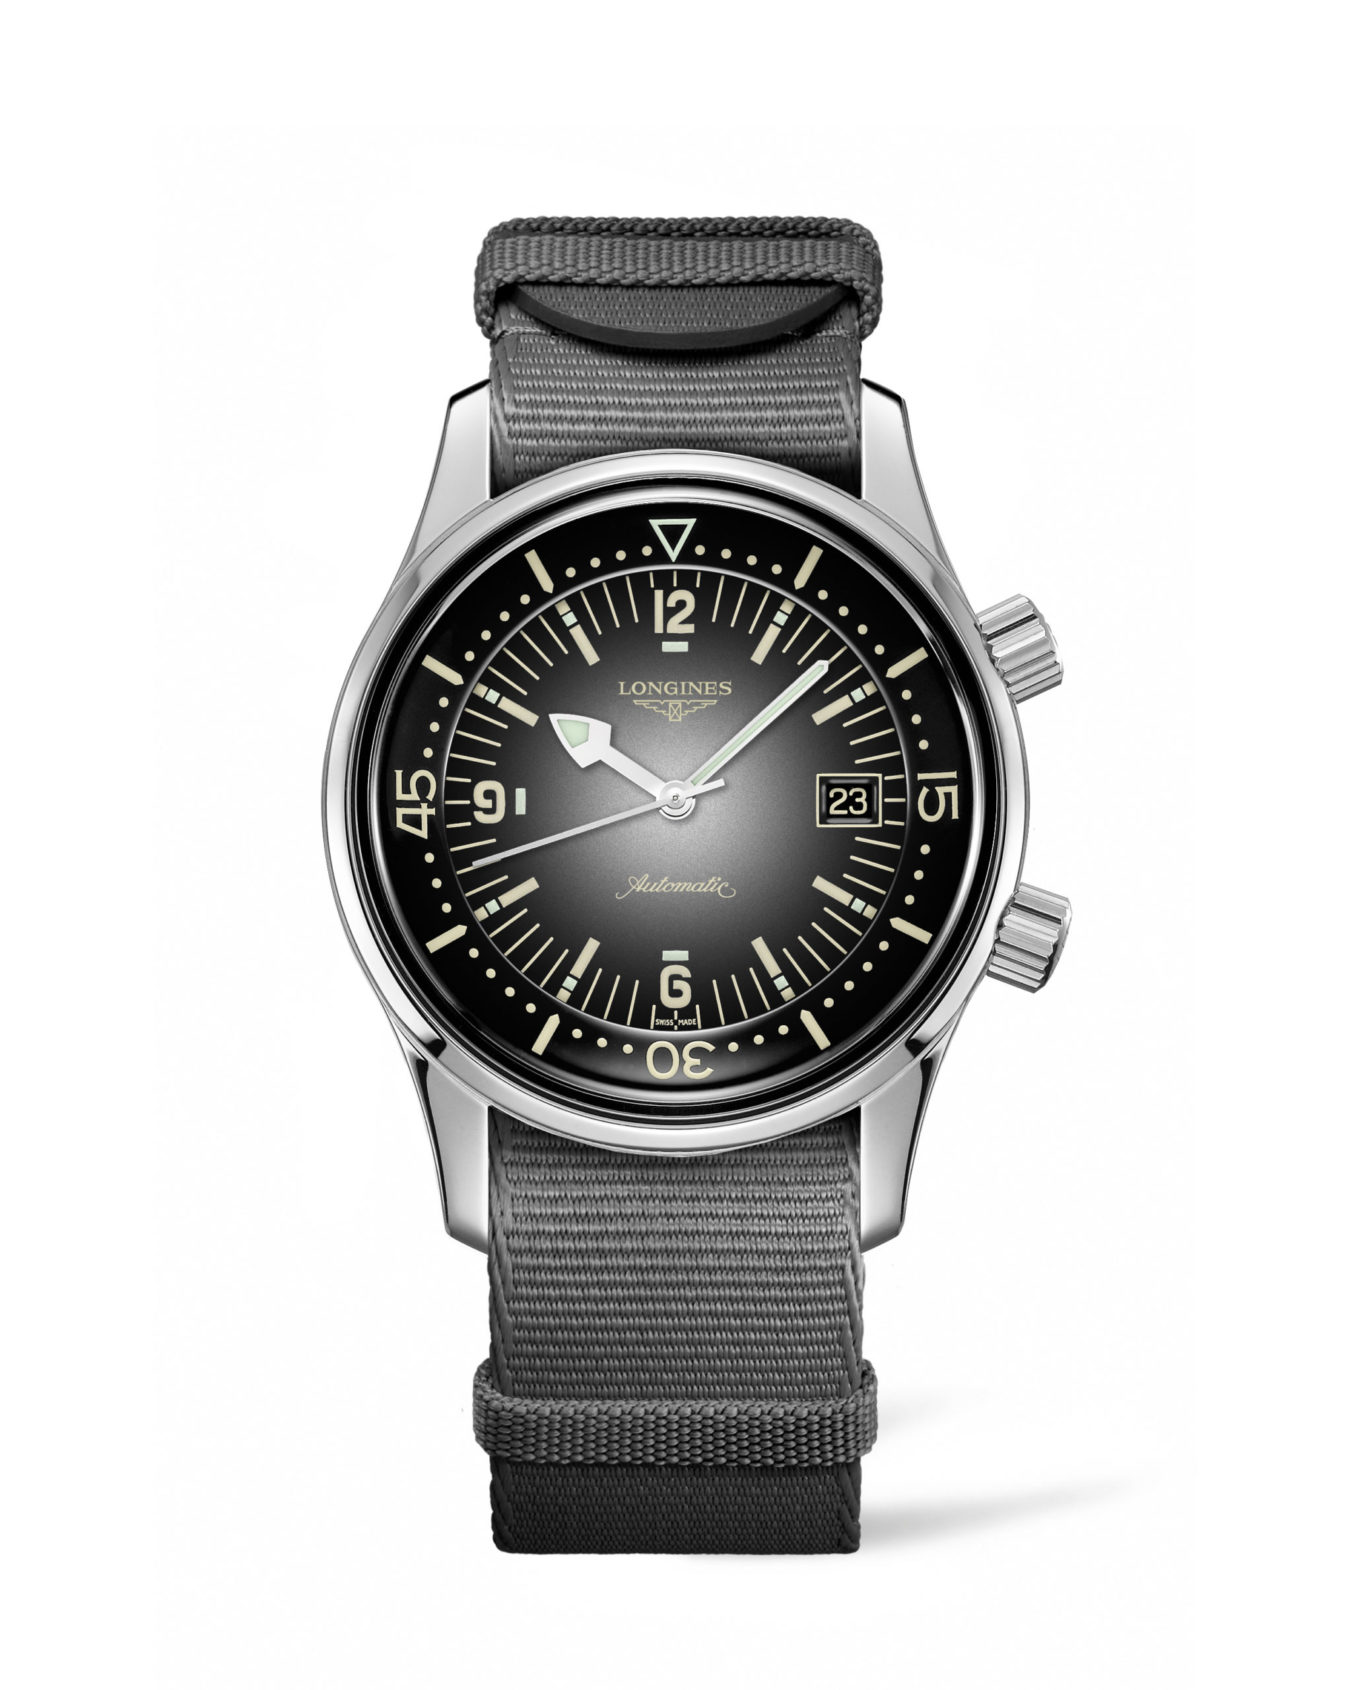 Longines' new Legend Divers with gradient dials L3.774.4.70.2-1-scaled-e1644889520624